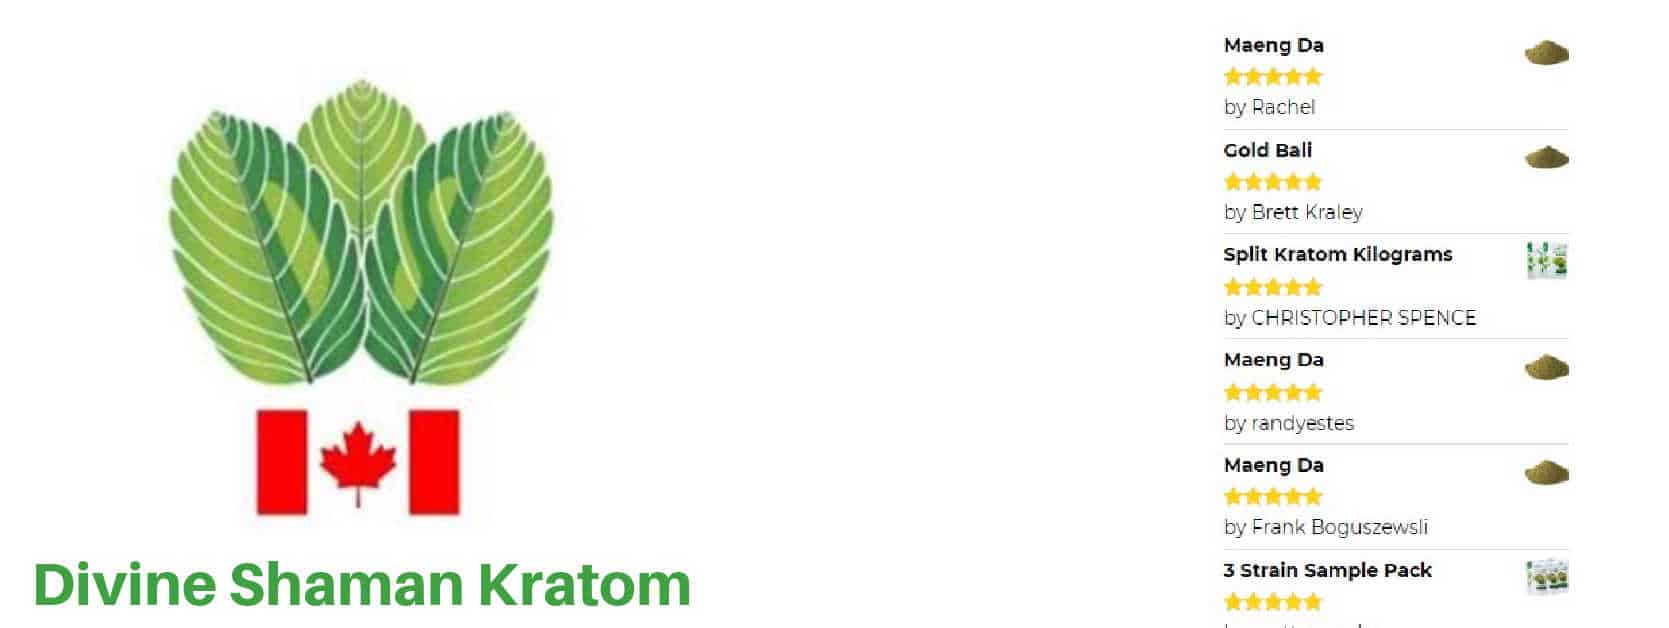 image of divine shaman kratom products reviews